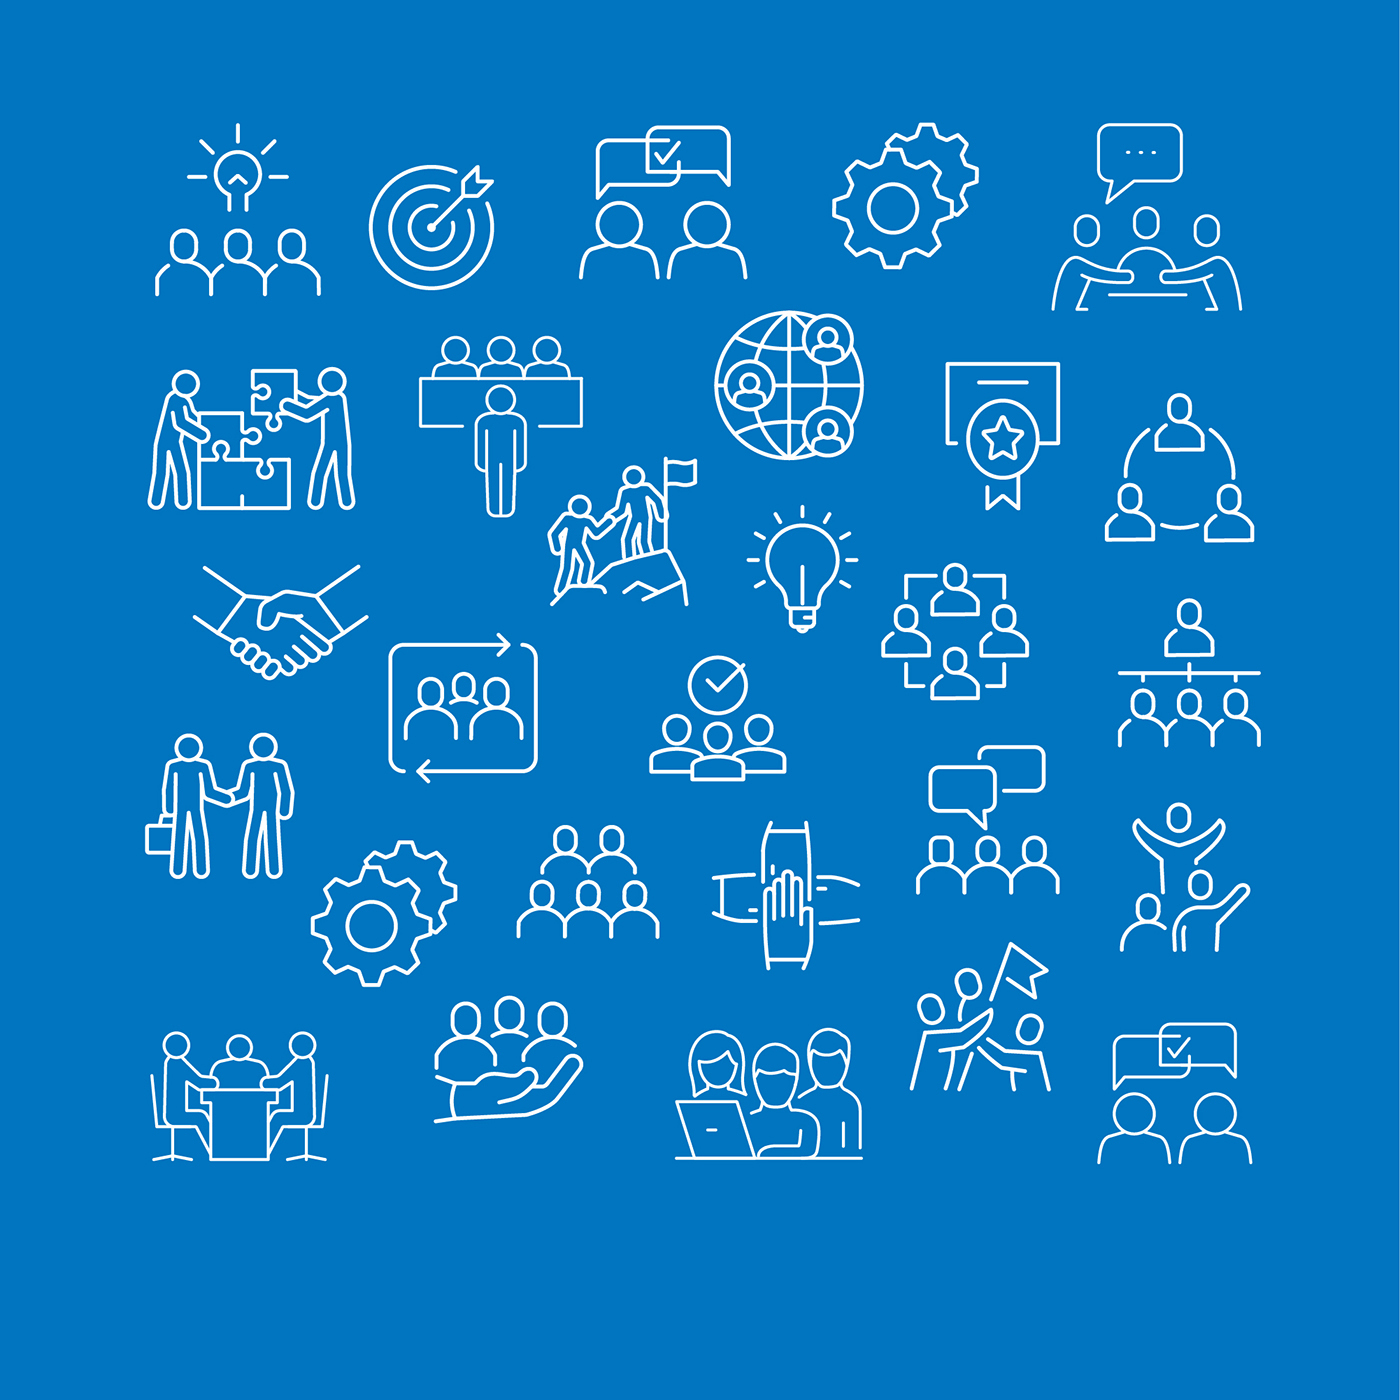 White icons representing the workforce on a bright blue background. 